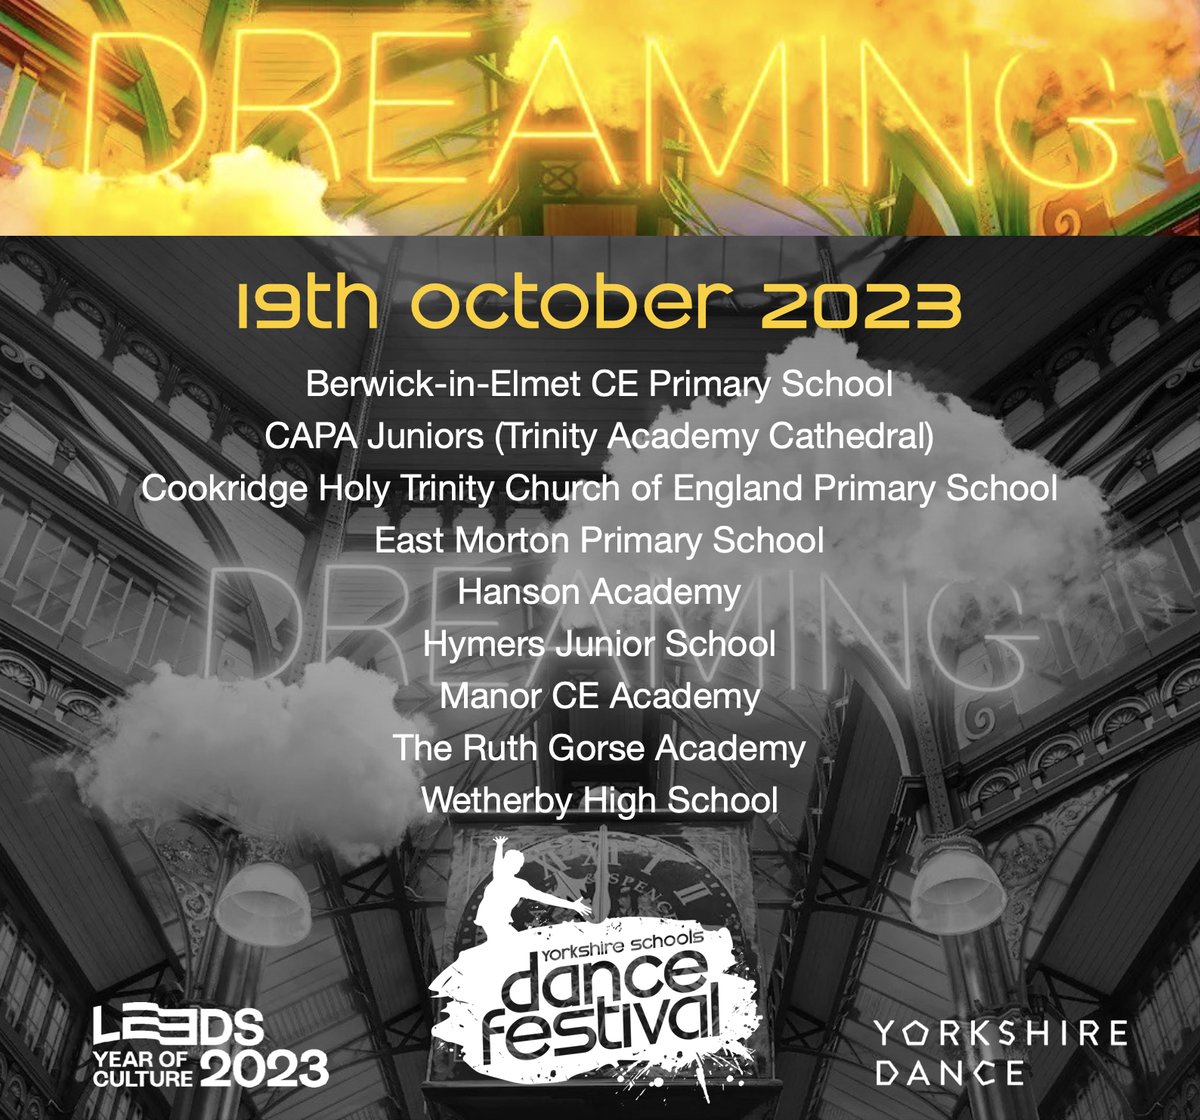 We'll be welcoming these 18 schools and colleges to @carriageworkstheatre on 18th/19th October. A full day of dance experiences and performance. Produced in partnership with @leeds2023 & @yorkshiredance #Dance #DanceinSchools #YouthDance#Leeds2023 #Schools #Yorkshire